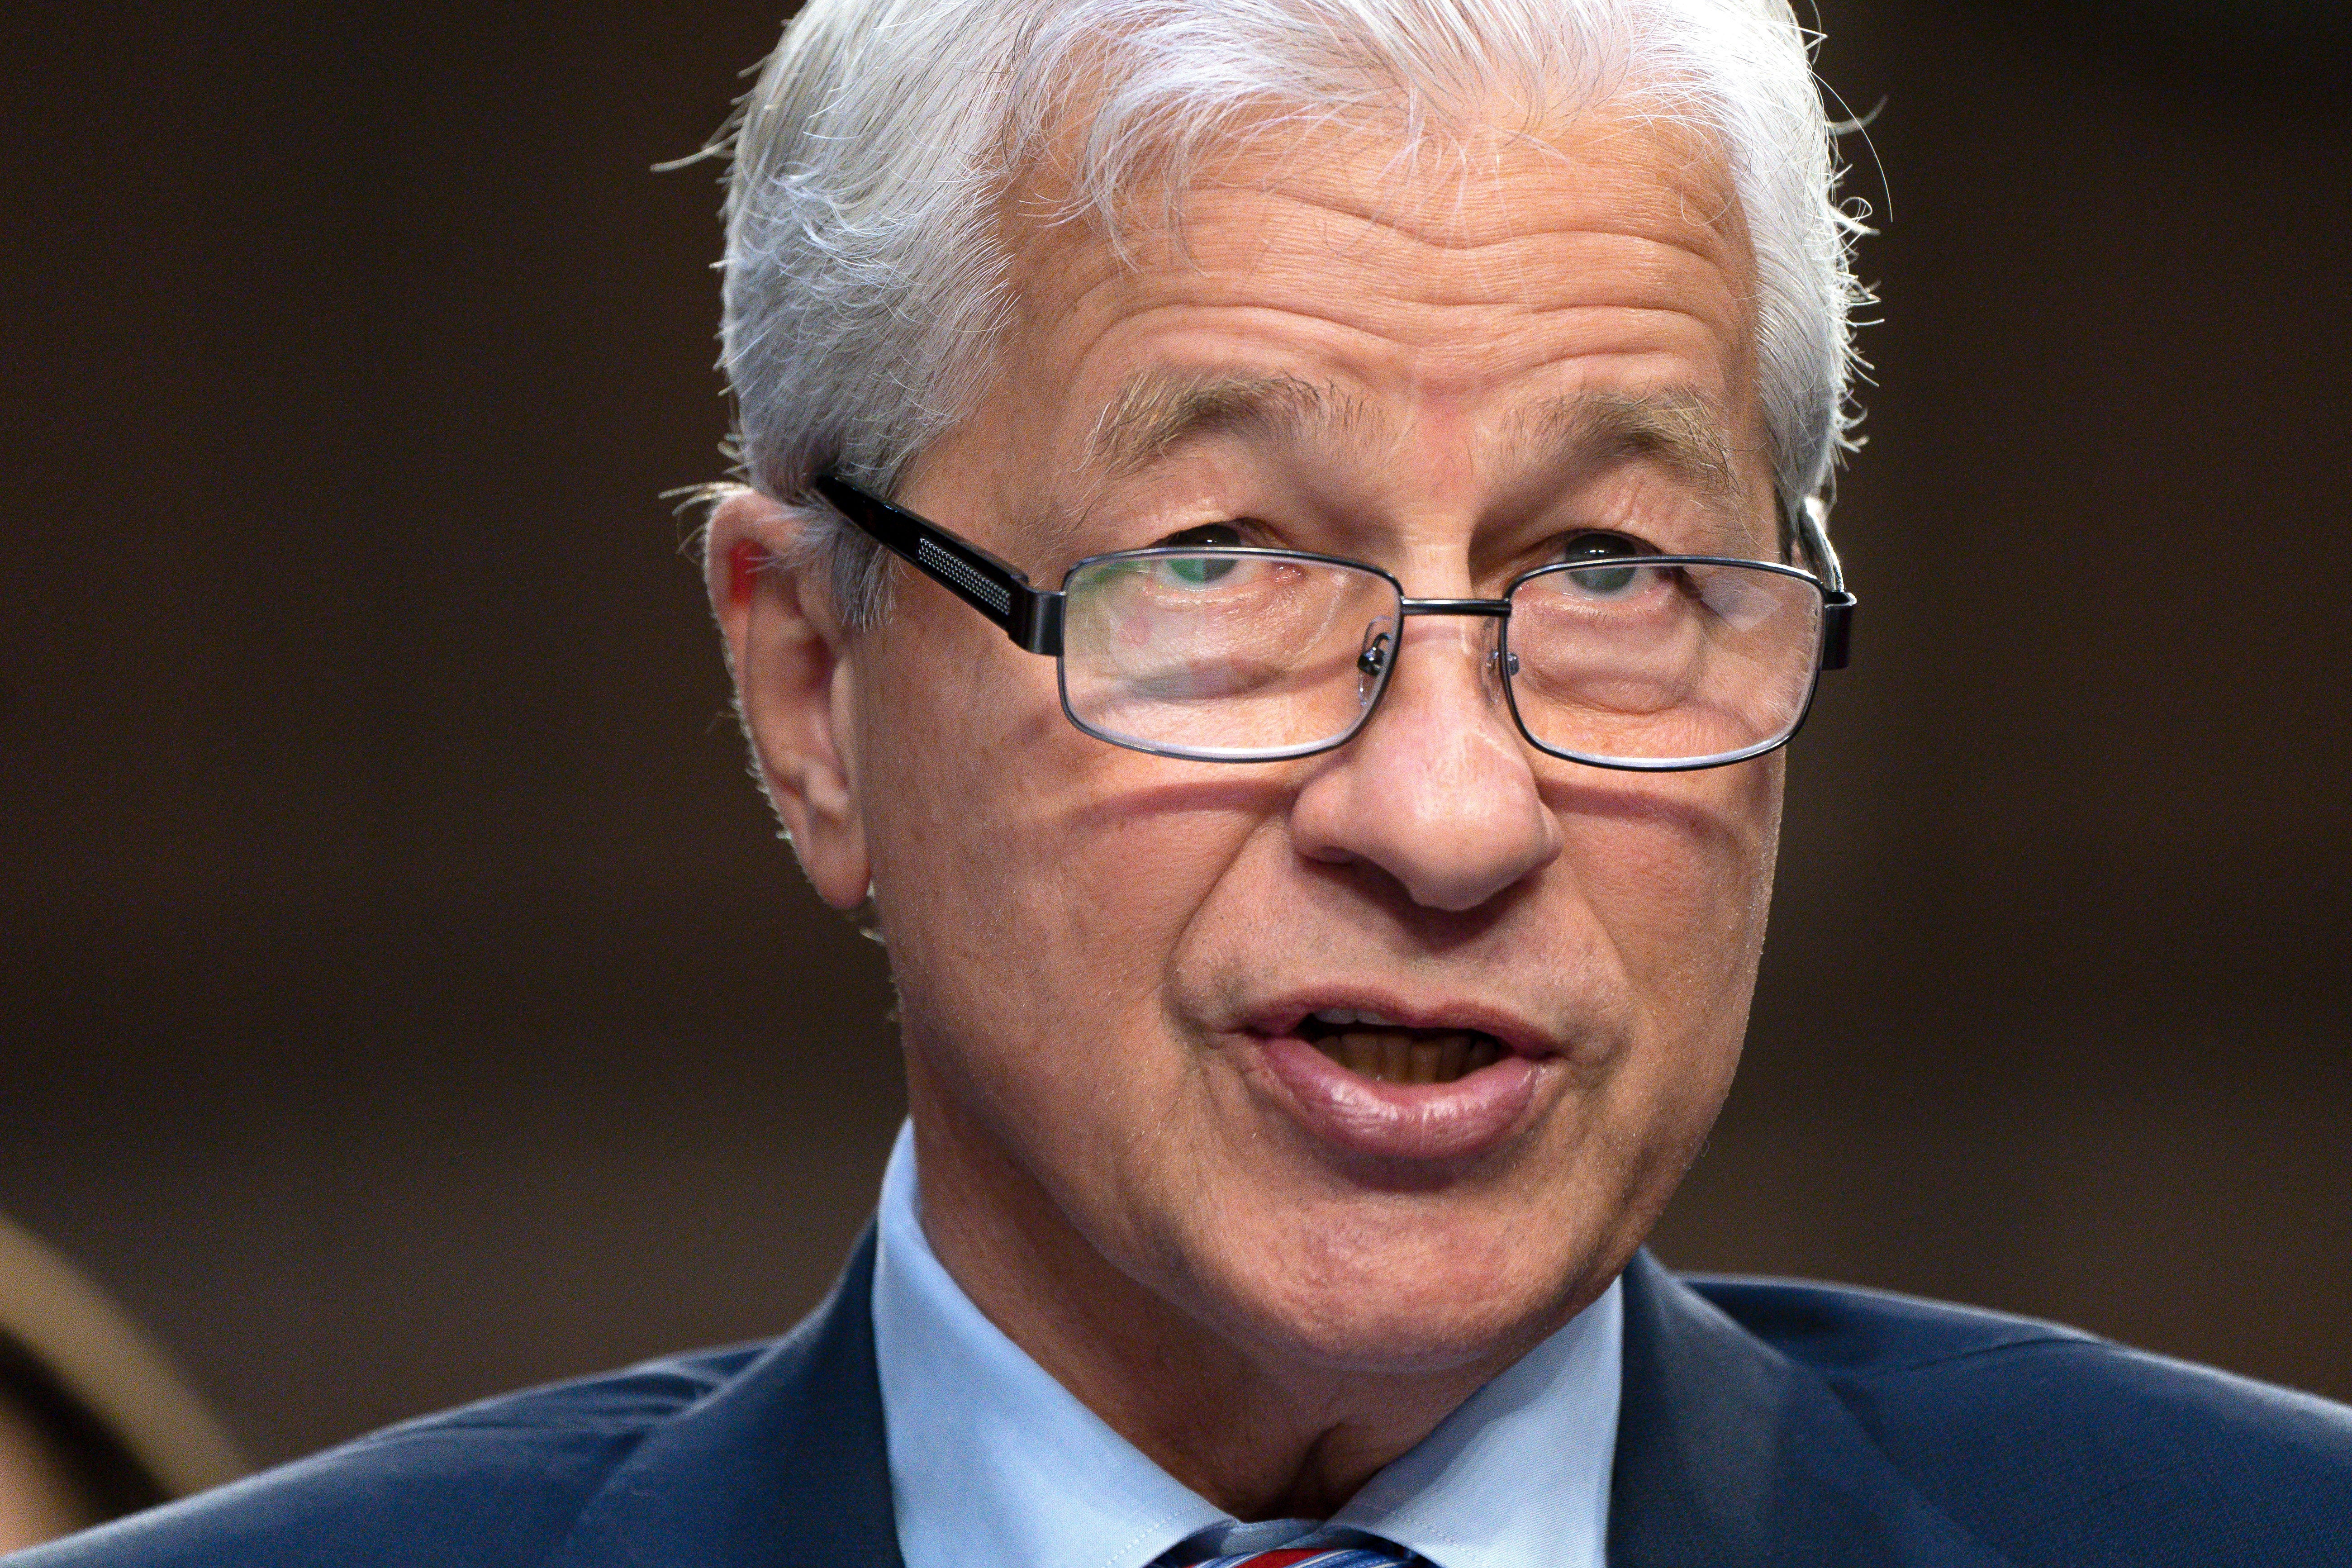 JPMorgan CEO Jamie Dimon said he had never heard of Epstein prior to his arrest in 2019